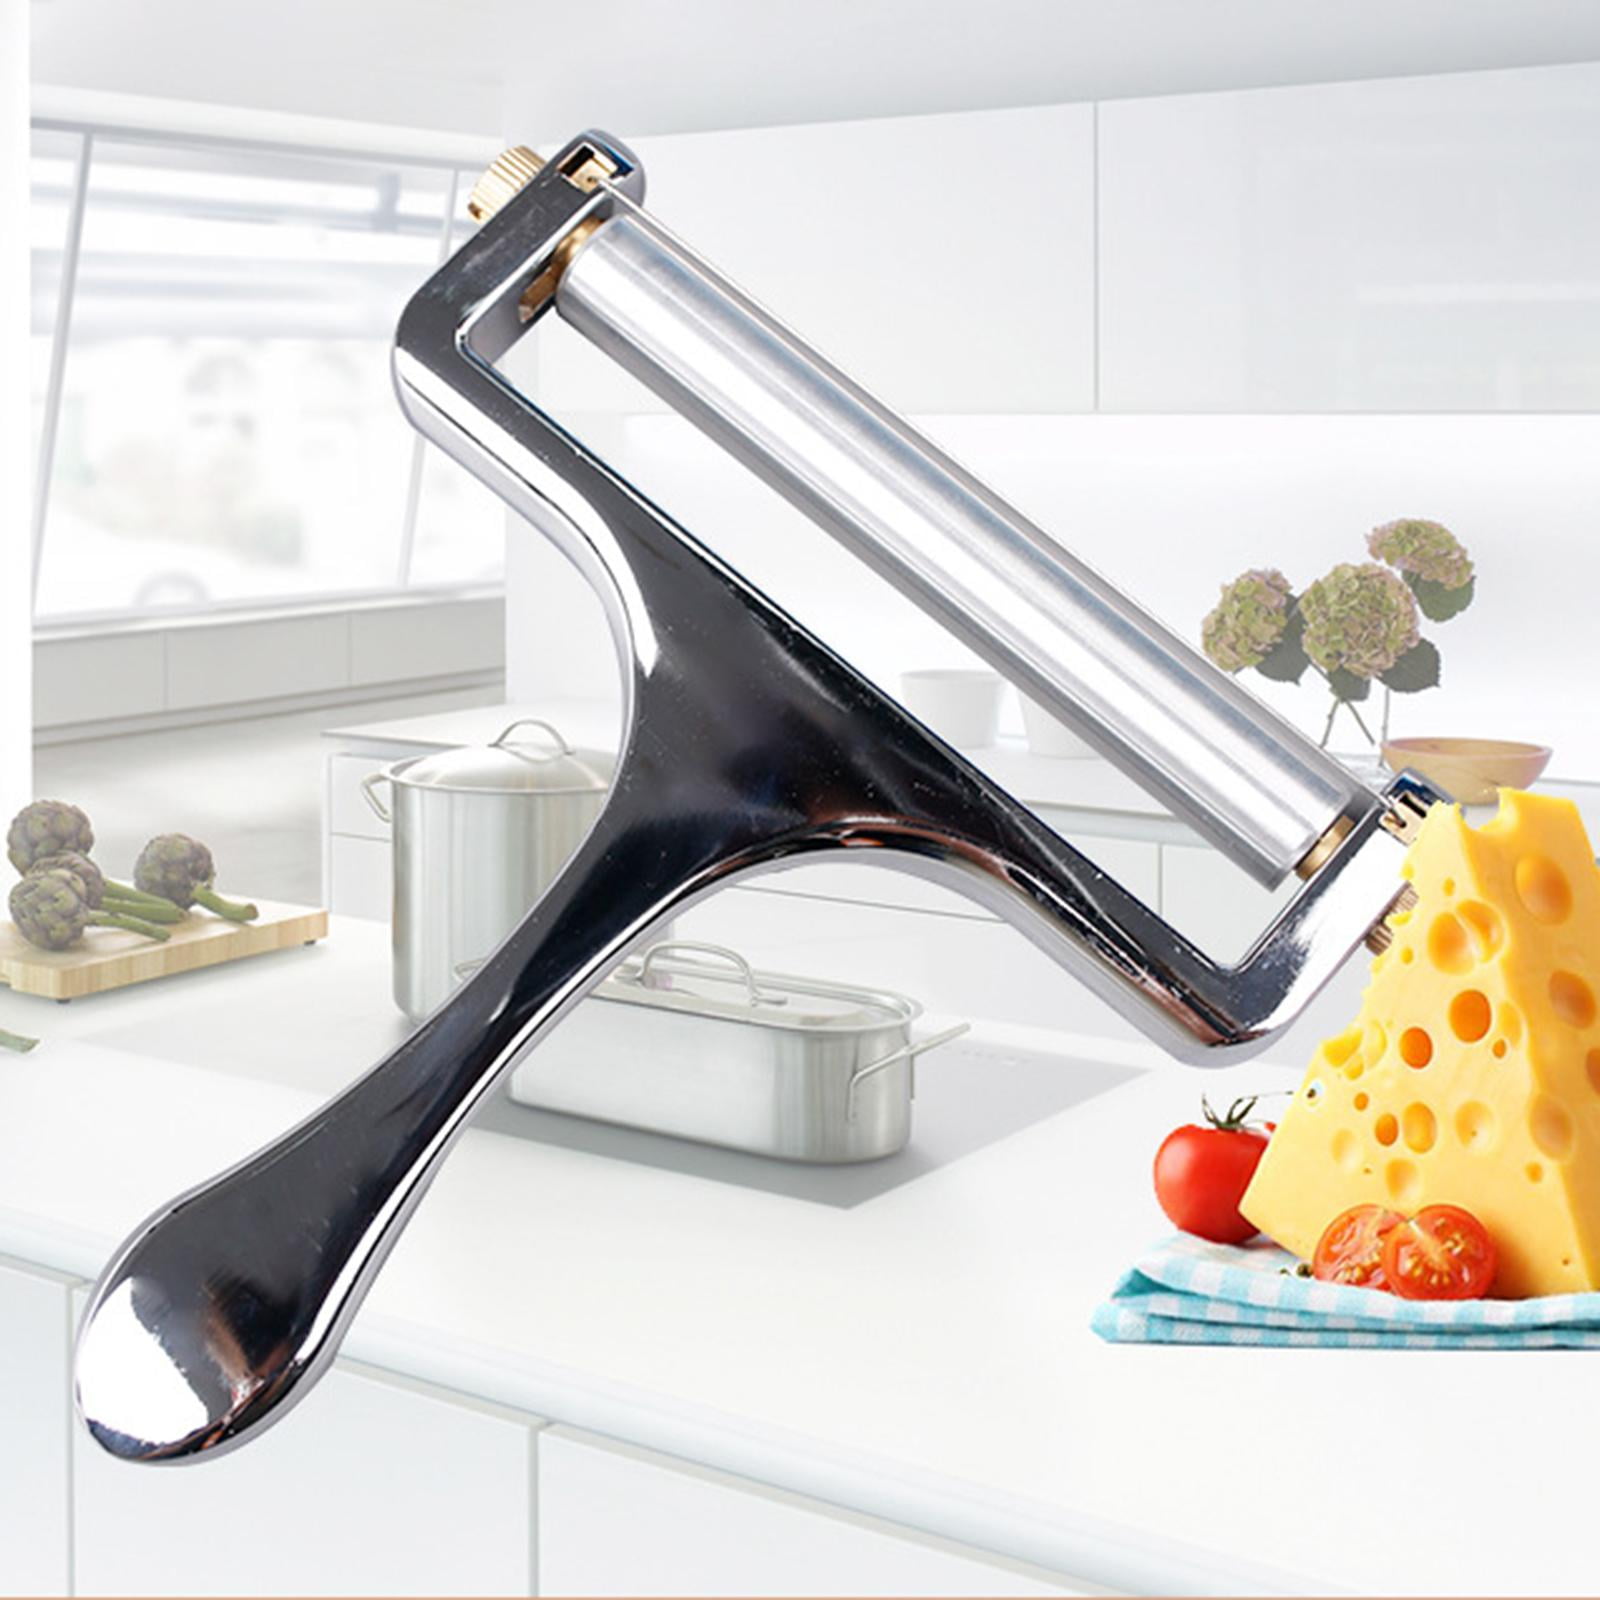 Protoiya Stainless Steel Cheese Slicer,Adjustable Cheese Shaver,for  Cheddar, Gruyere, Raclette, Mozzarella Cheese Block,Thick and Thin Slicer,  Cheese